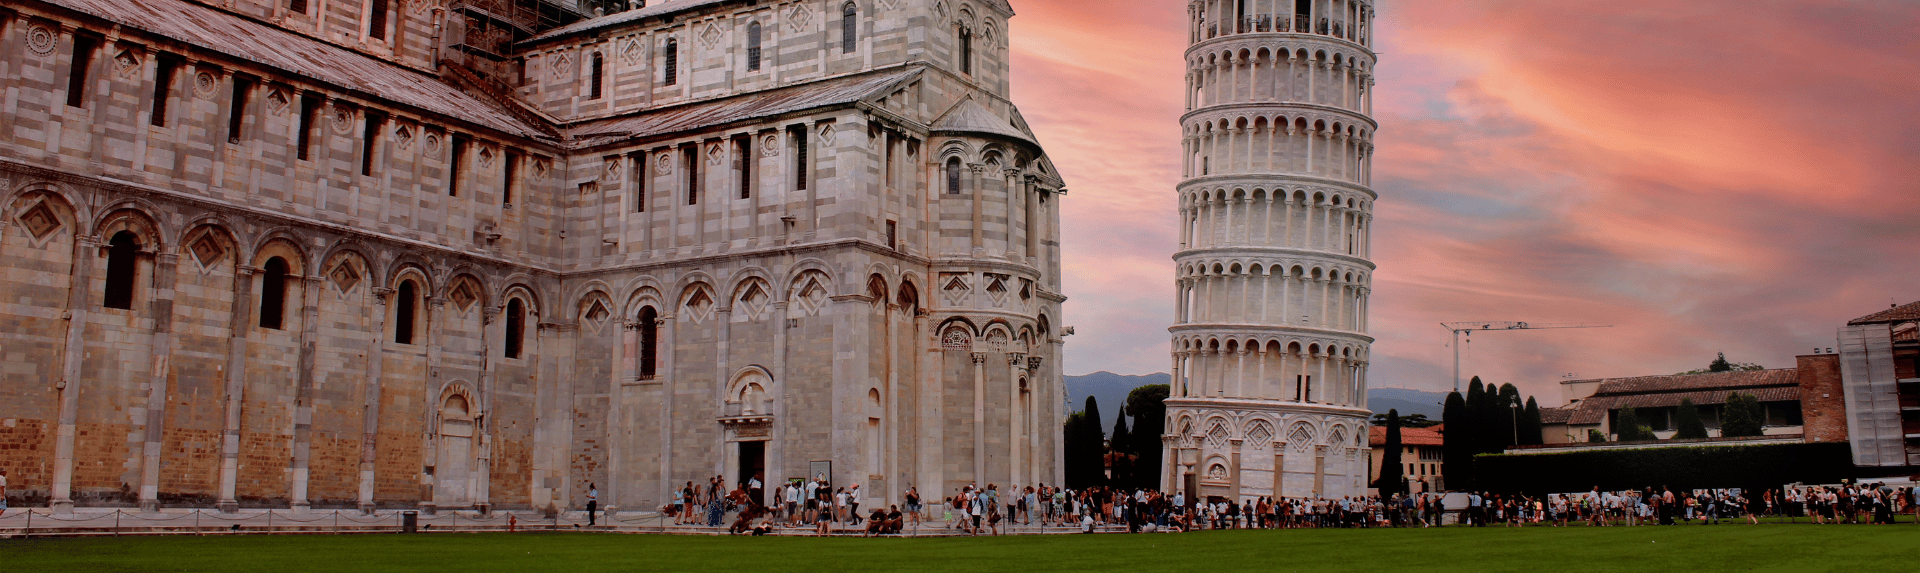 What is Pisa known for?